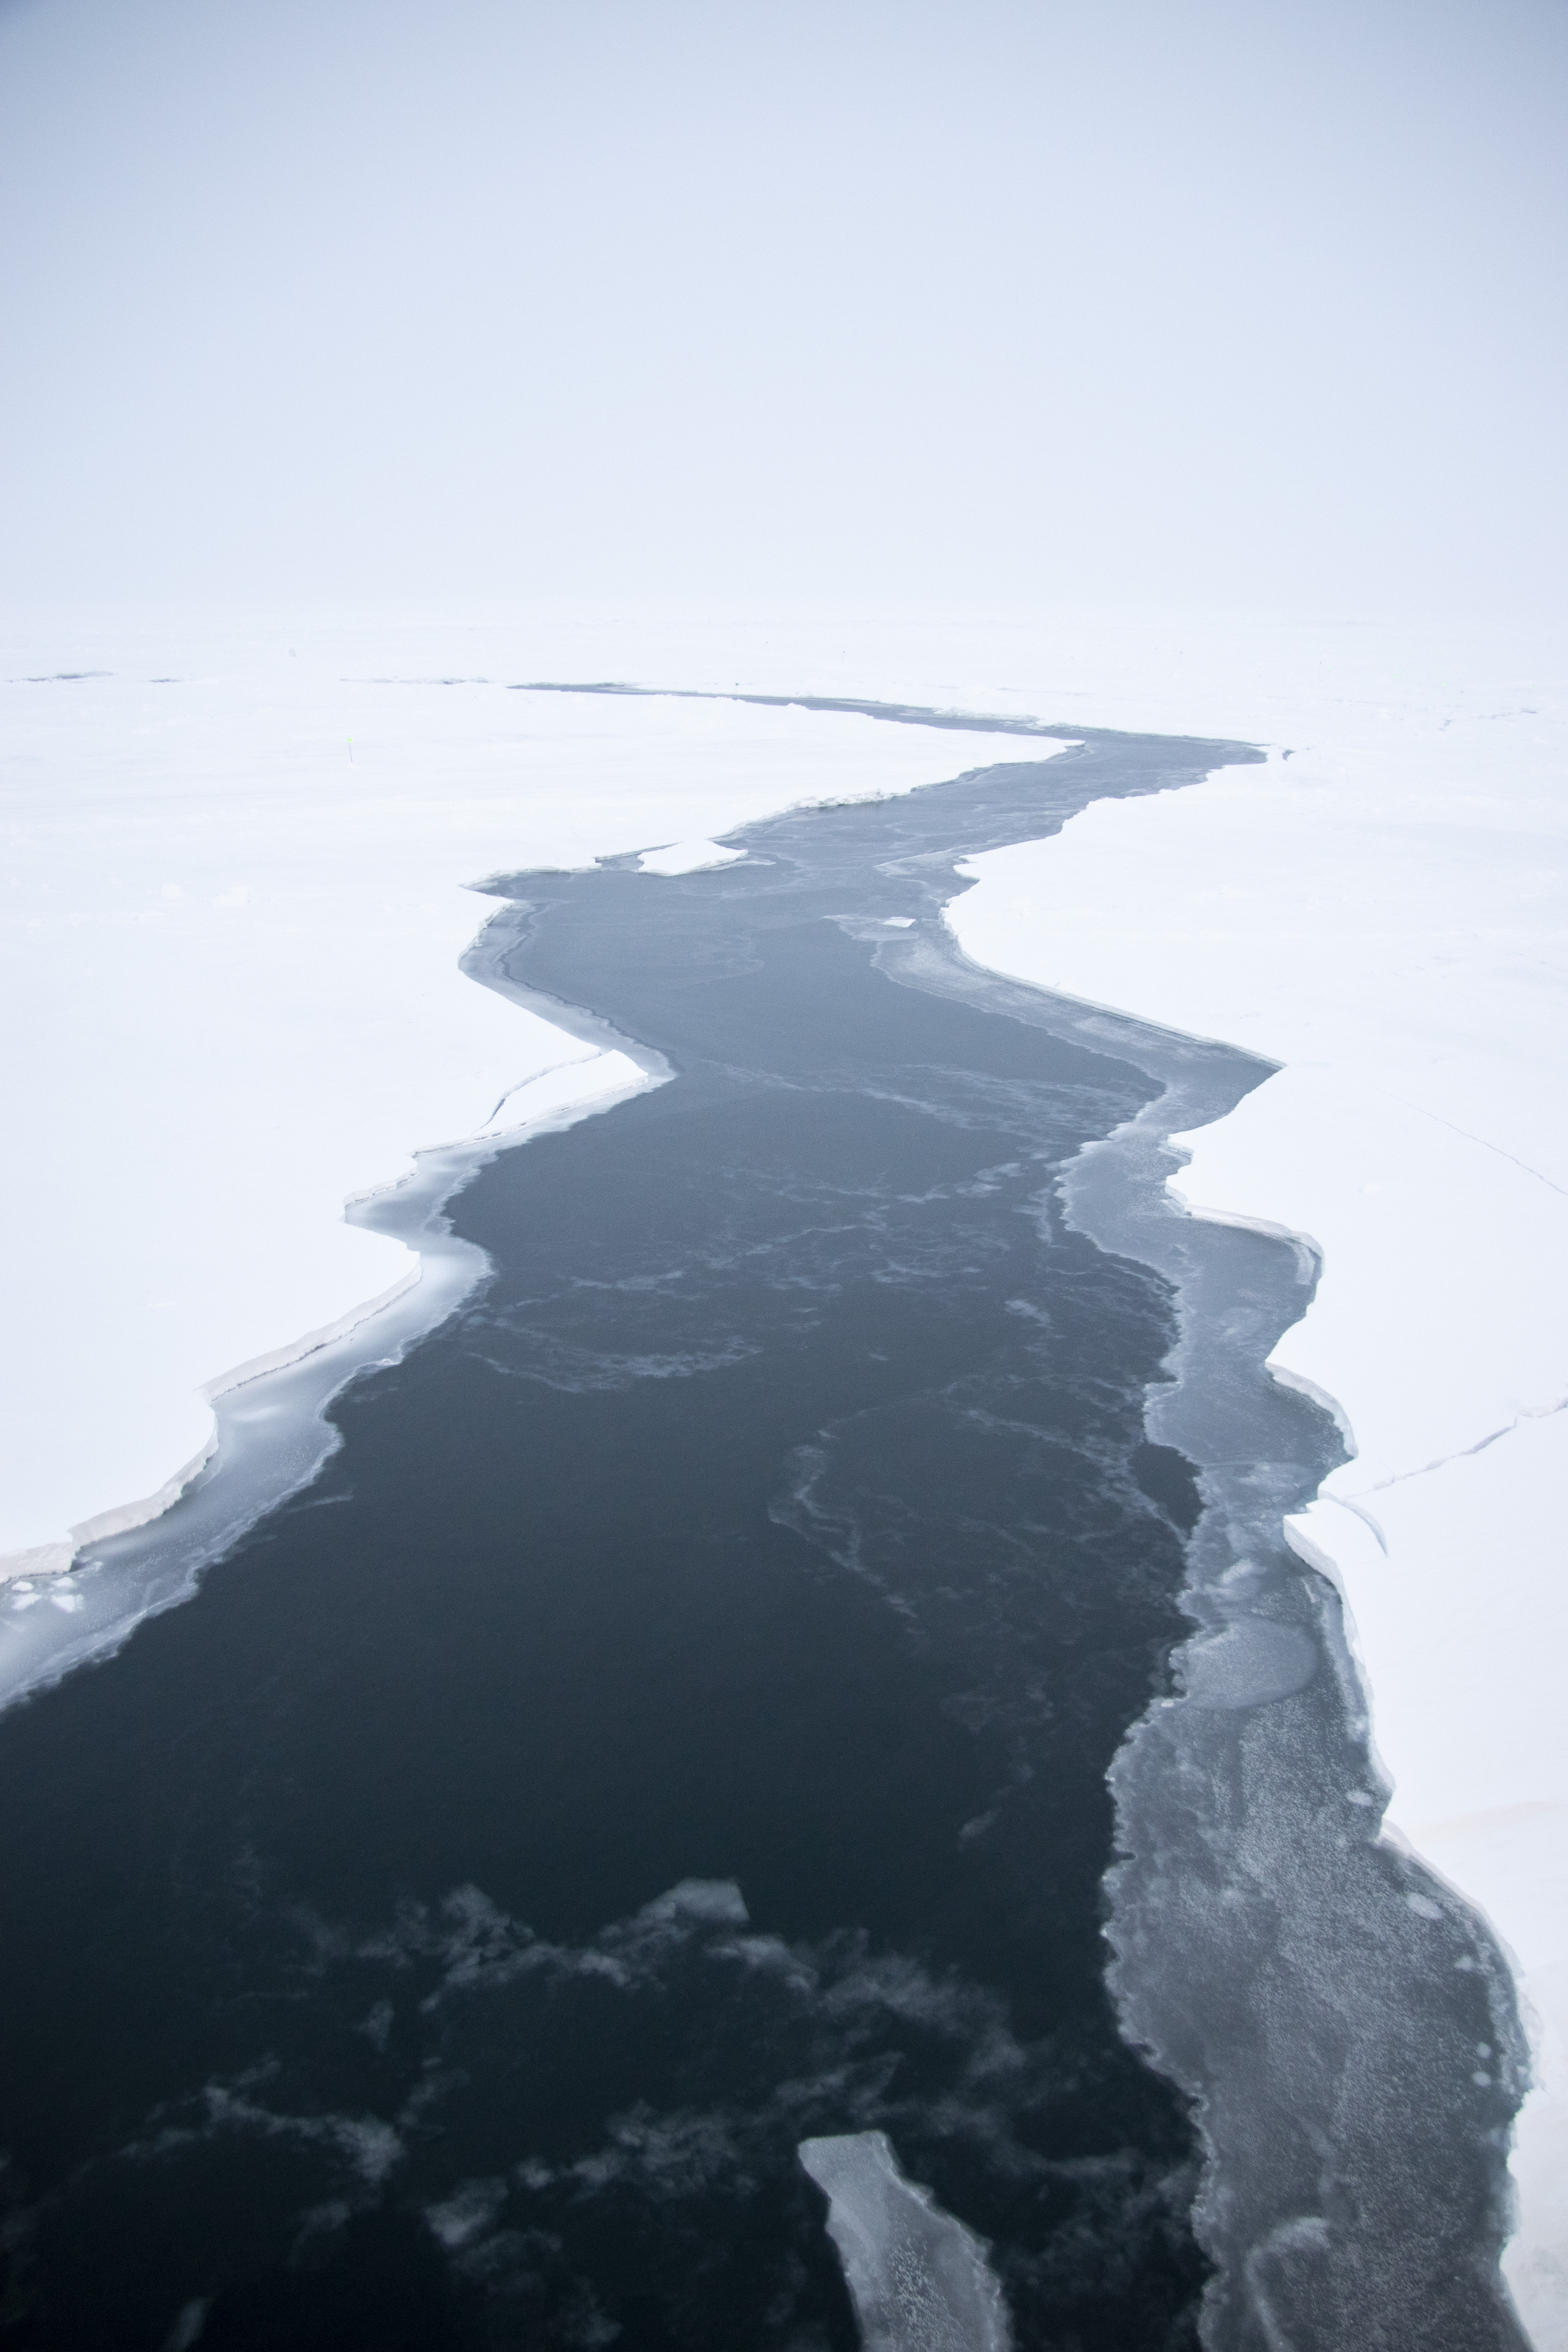 Arctic sea ice. Photo courtesy of Steven Fons. Click image to download hi-res version.